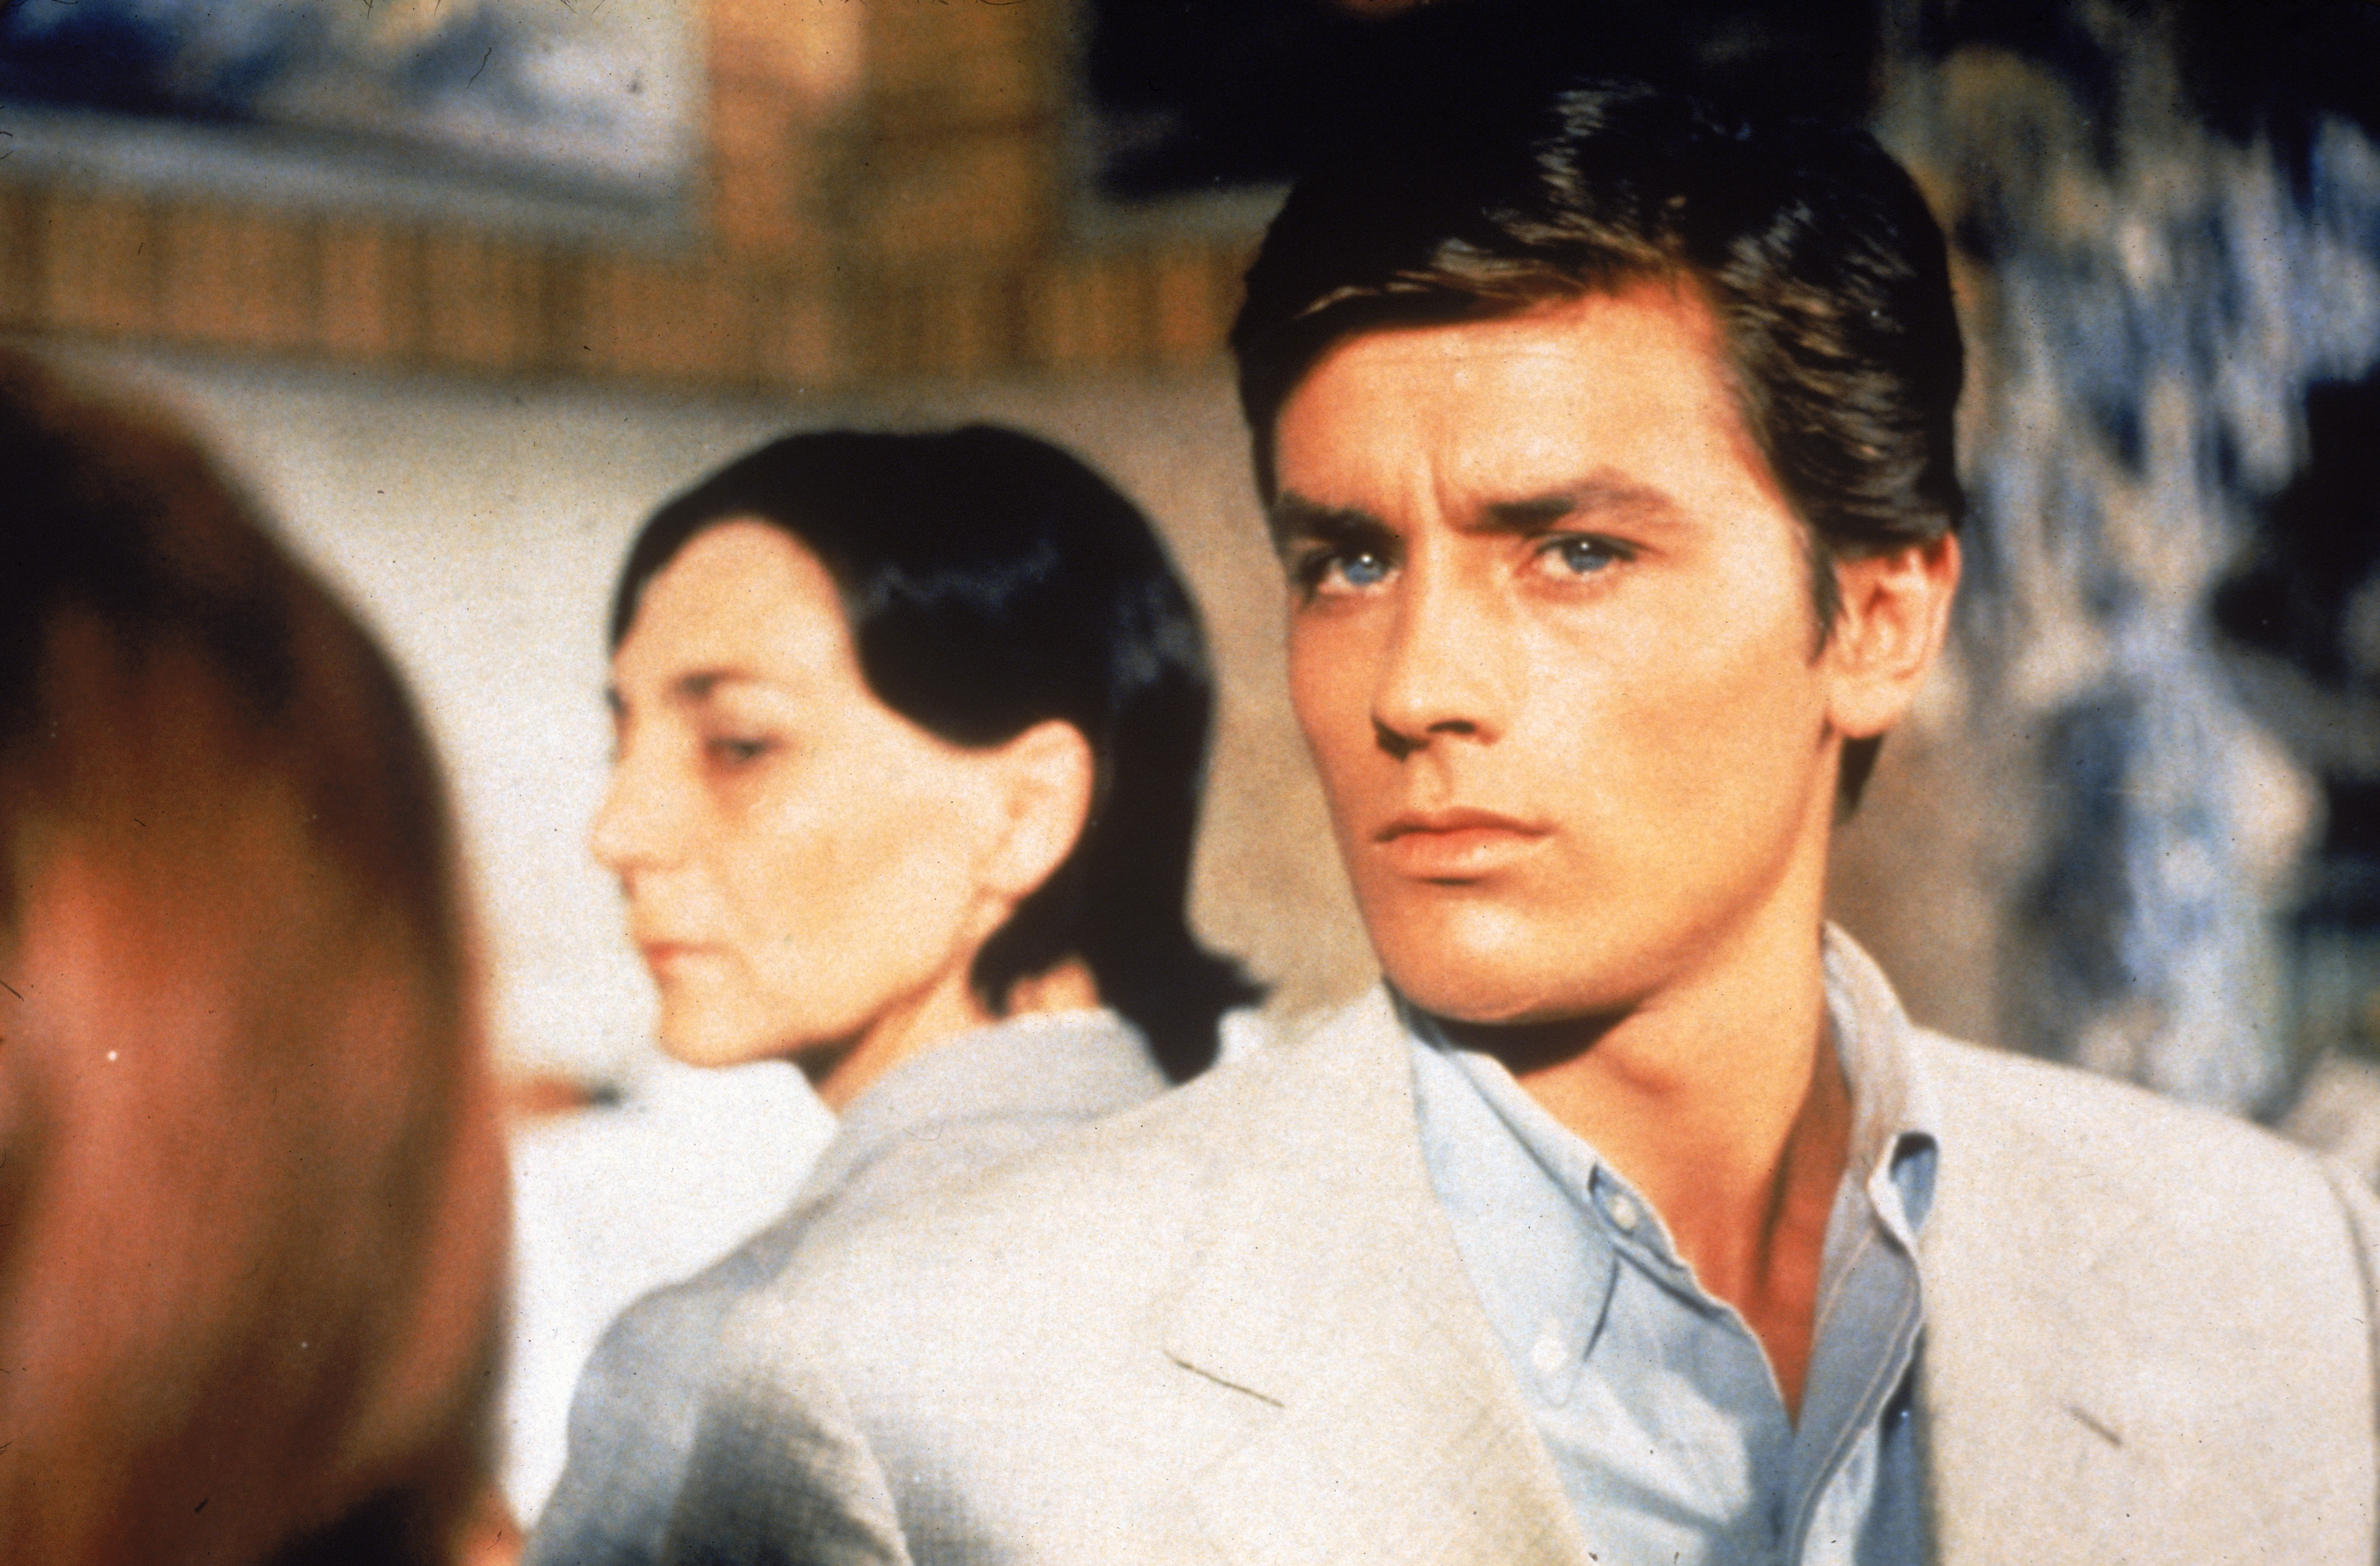 Alain Delon posing as his character in "Purple Noon" in 1960. | Source: Getty Images